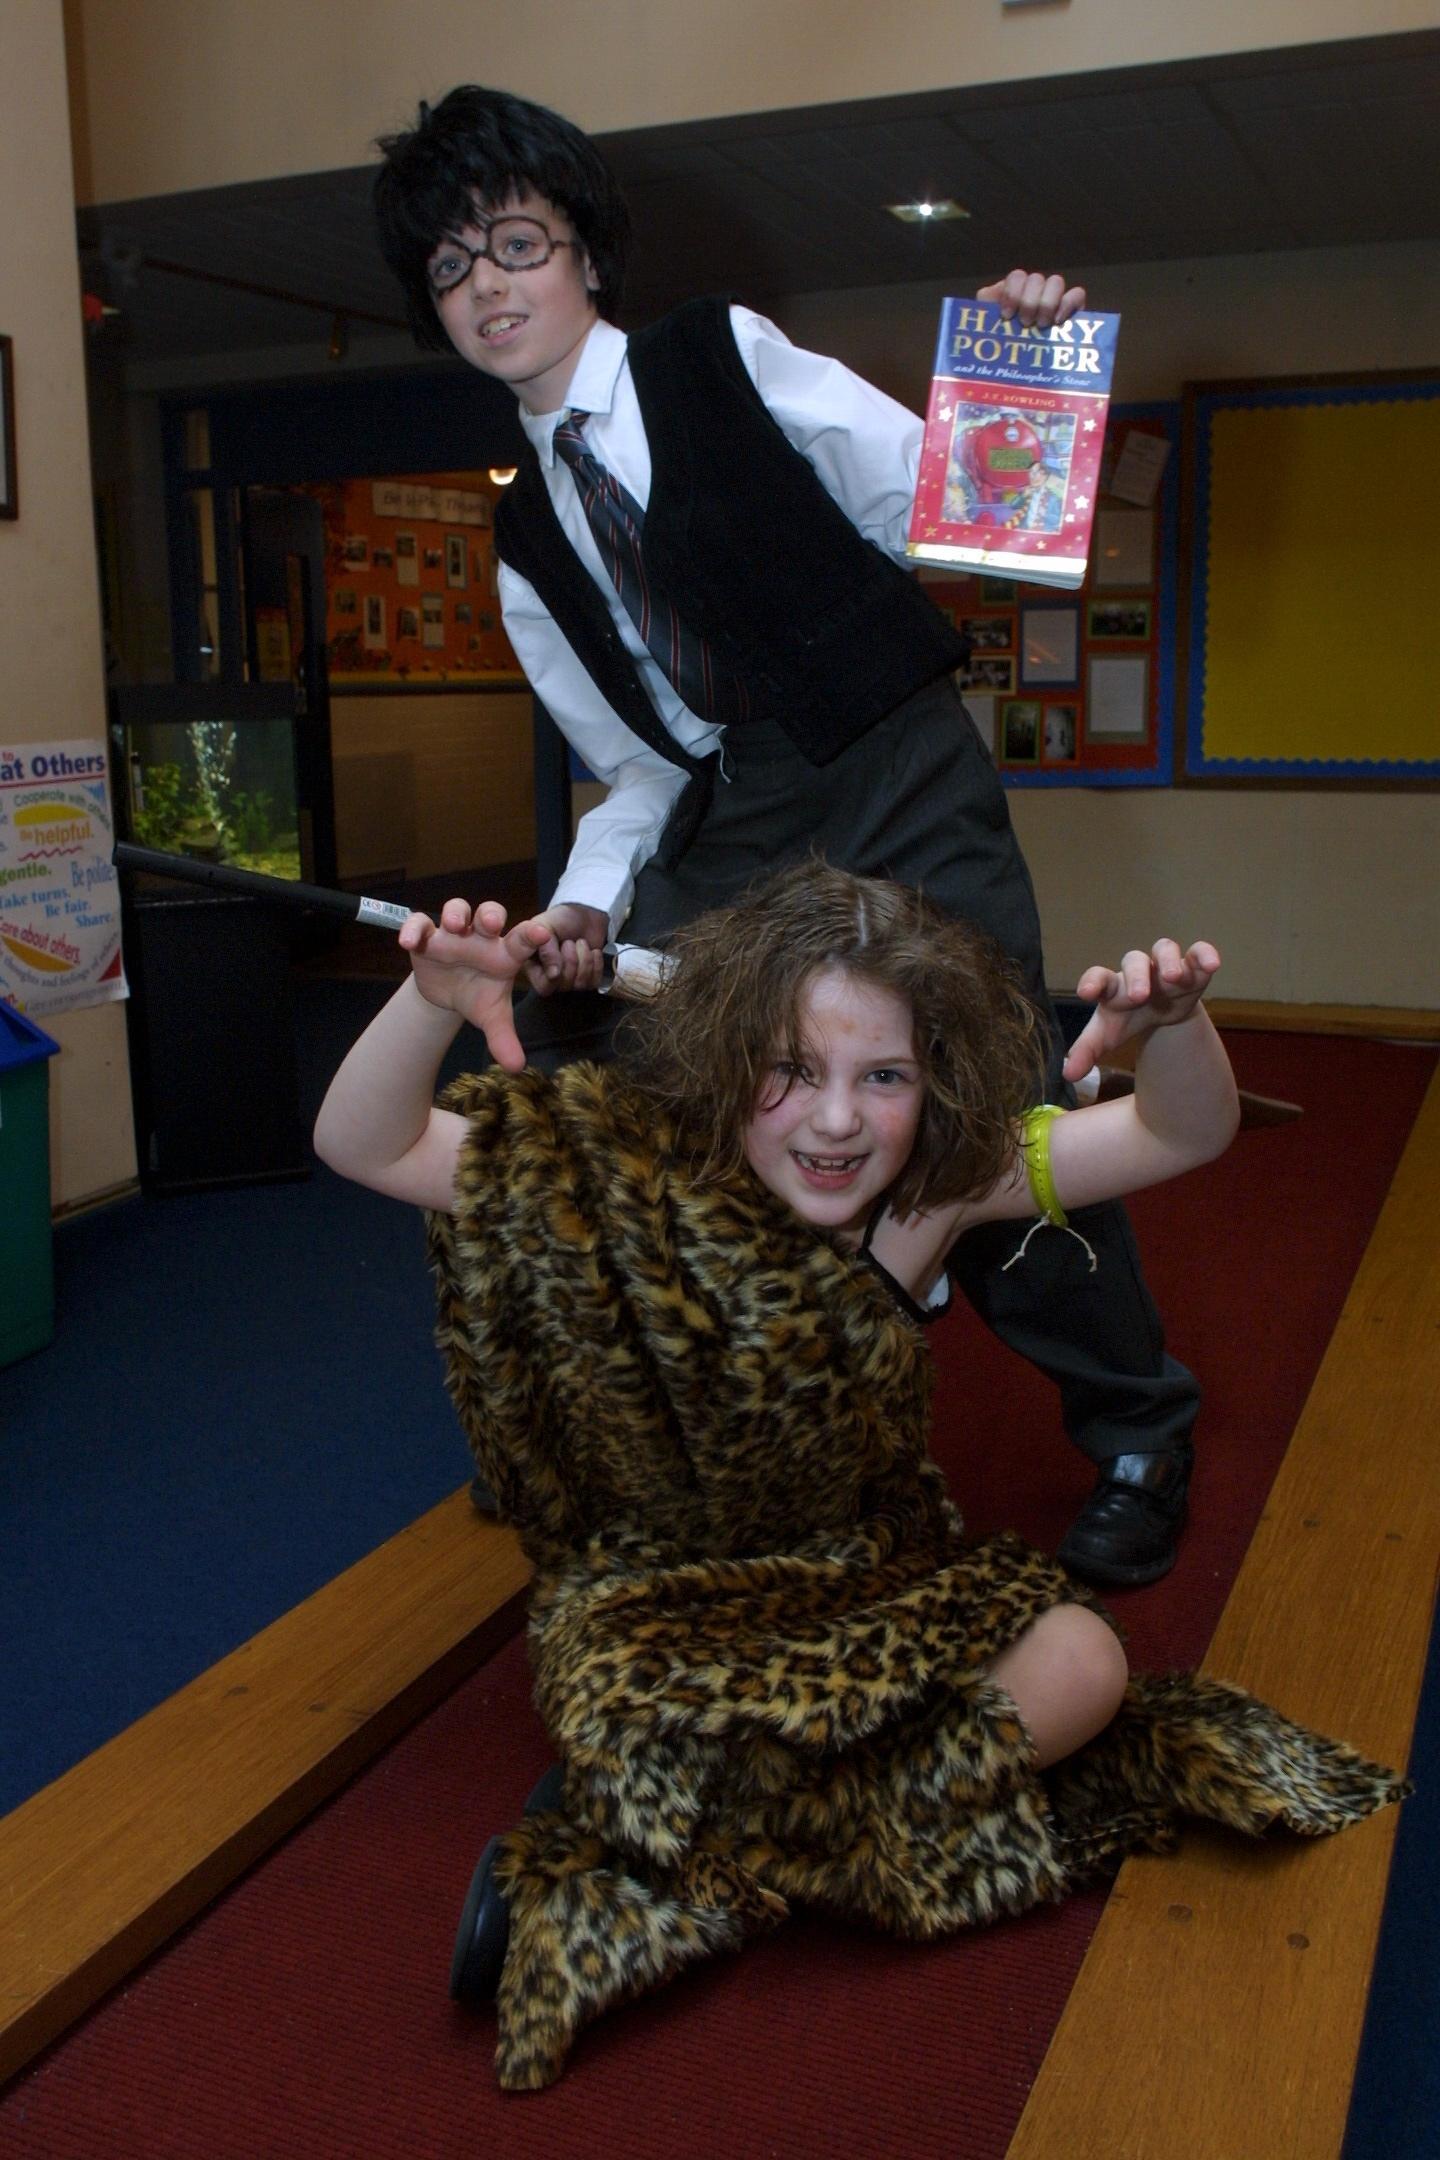 Thomas as Harry Potter and Jessica as Stigg Of The Dump.